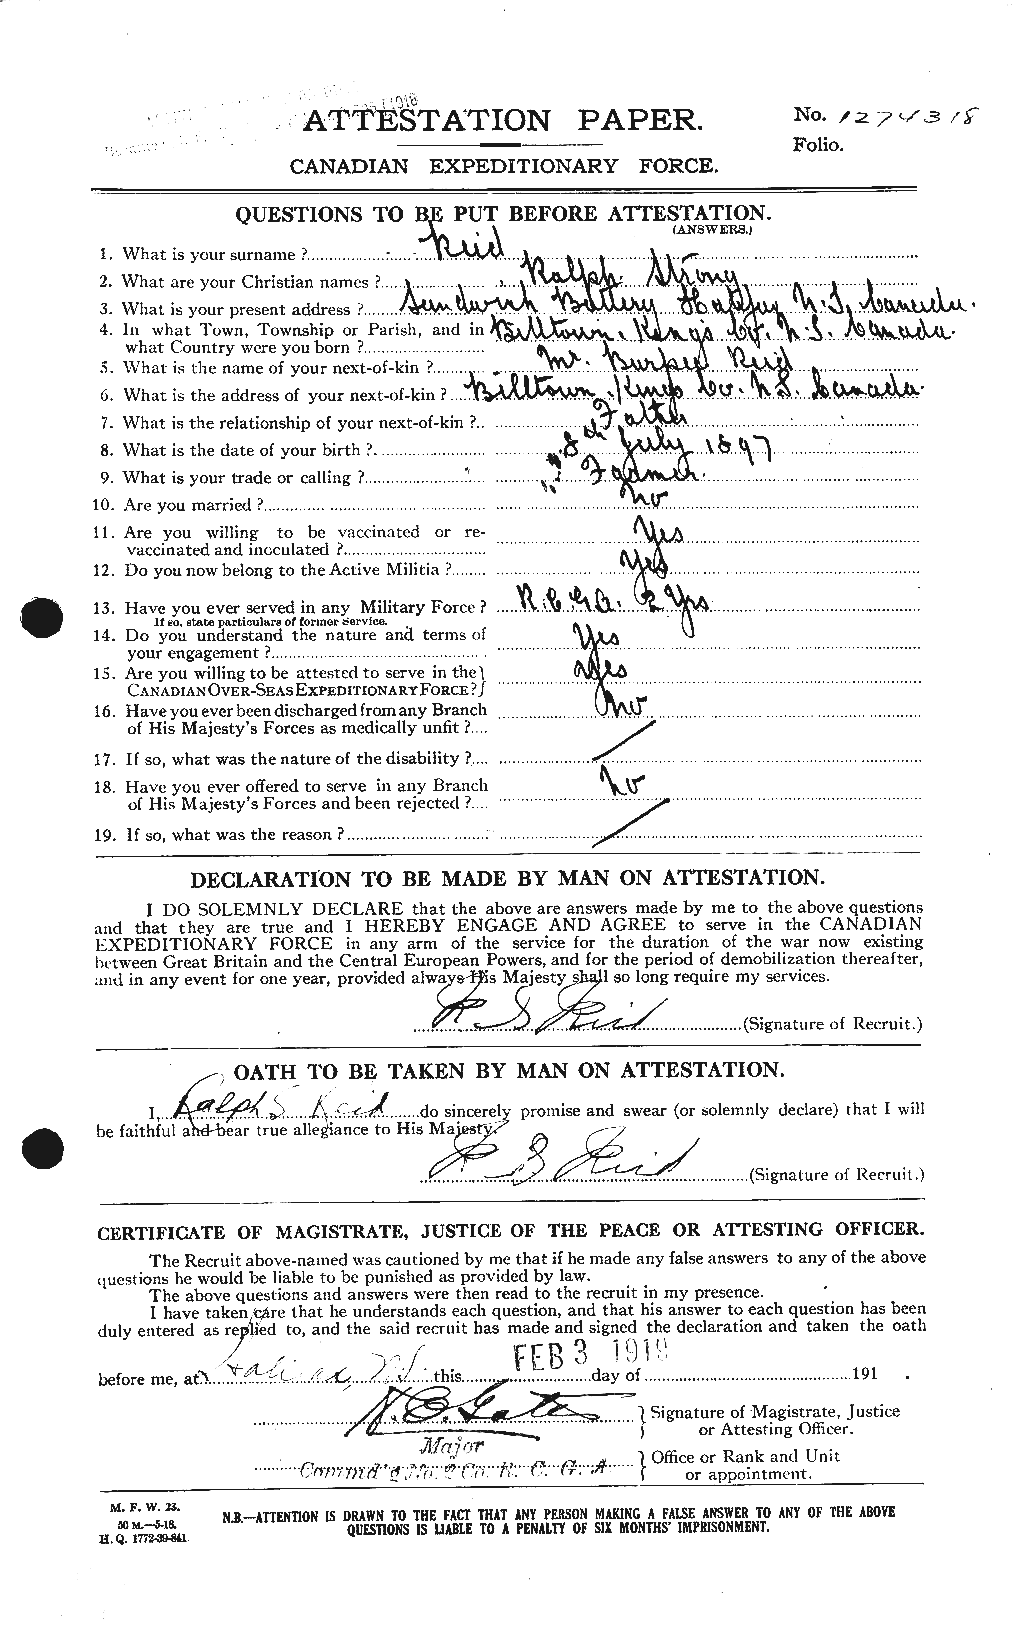 Personnel Records of the First World War - CEF 601851a